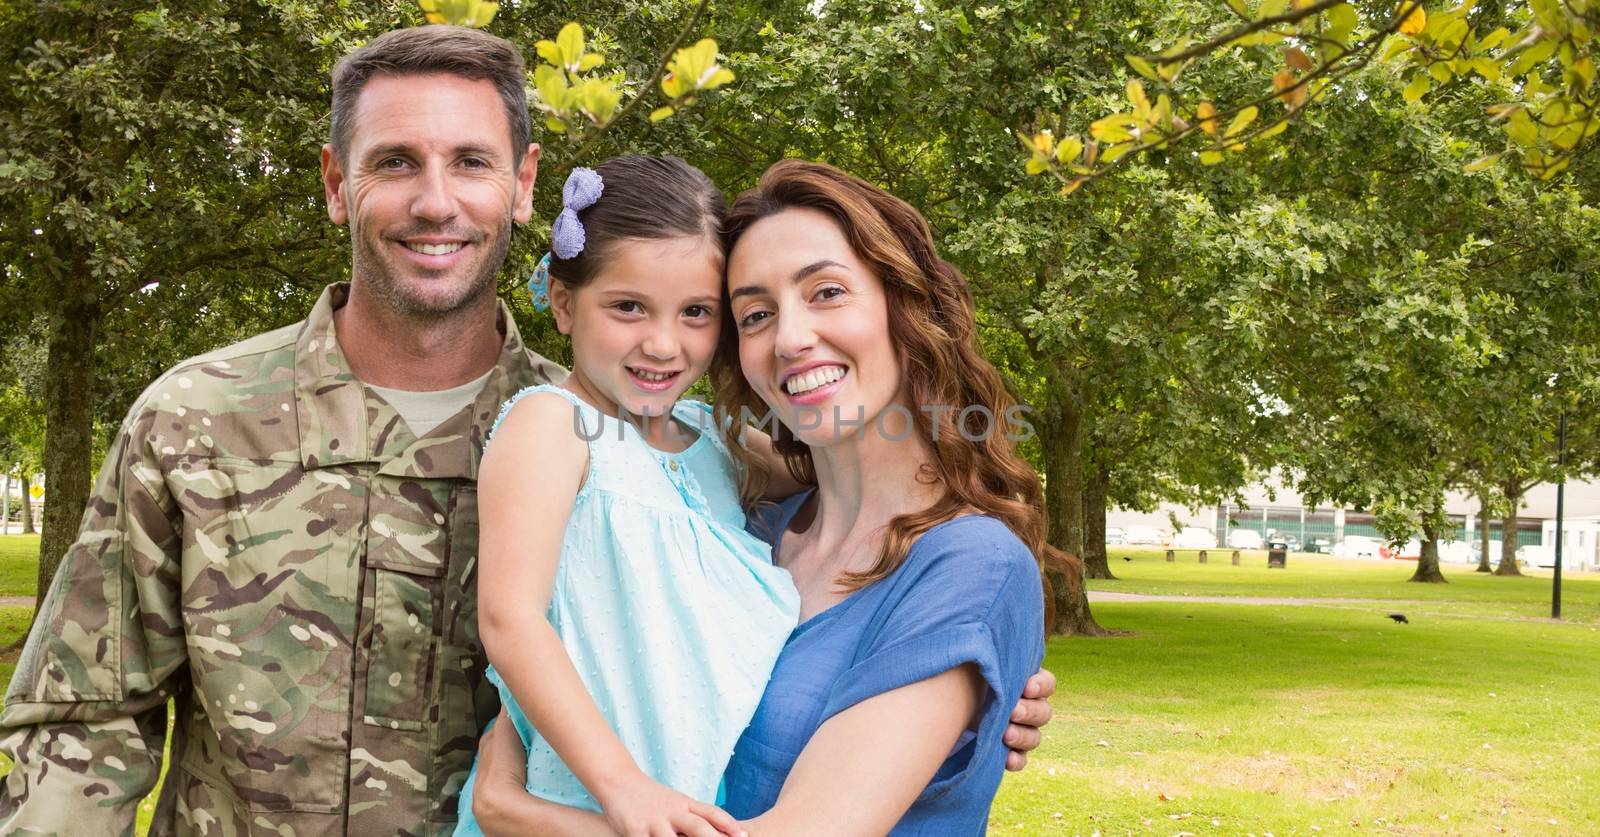 Soldier reunited with their family in park